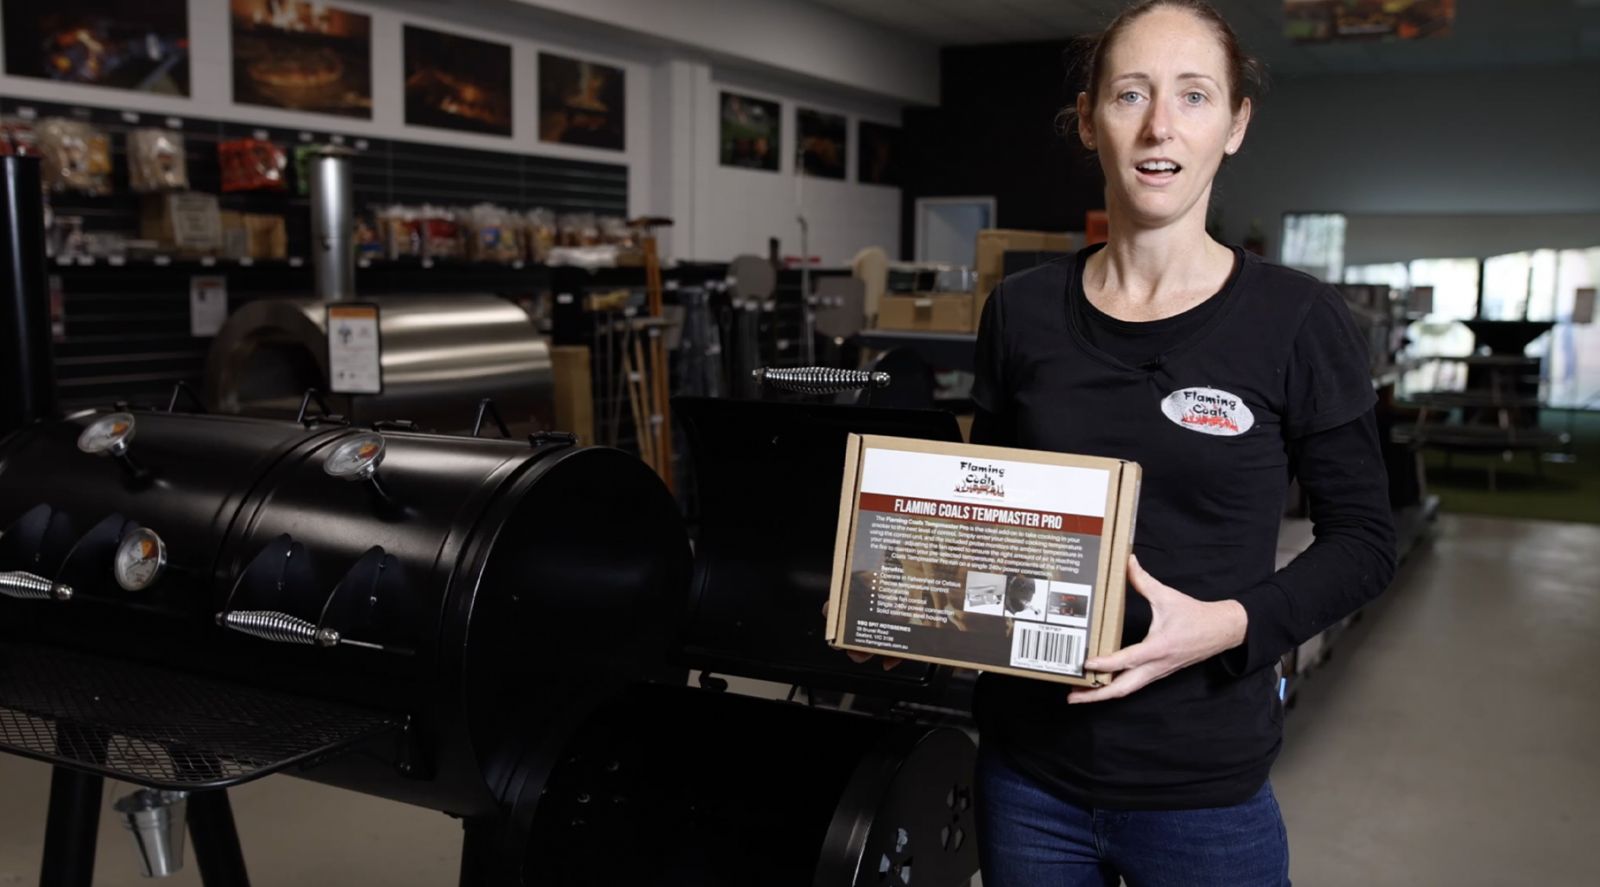 This image shows an offset smoker and a woman holding the Tempmaster pro 